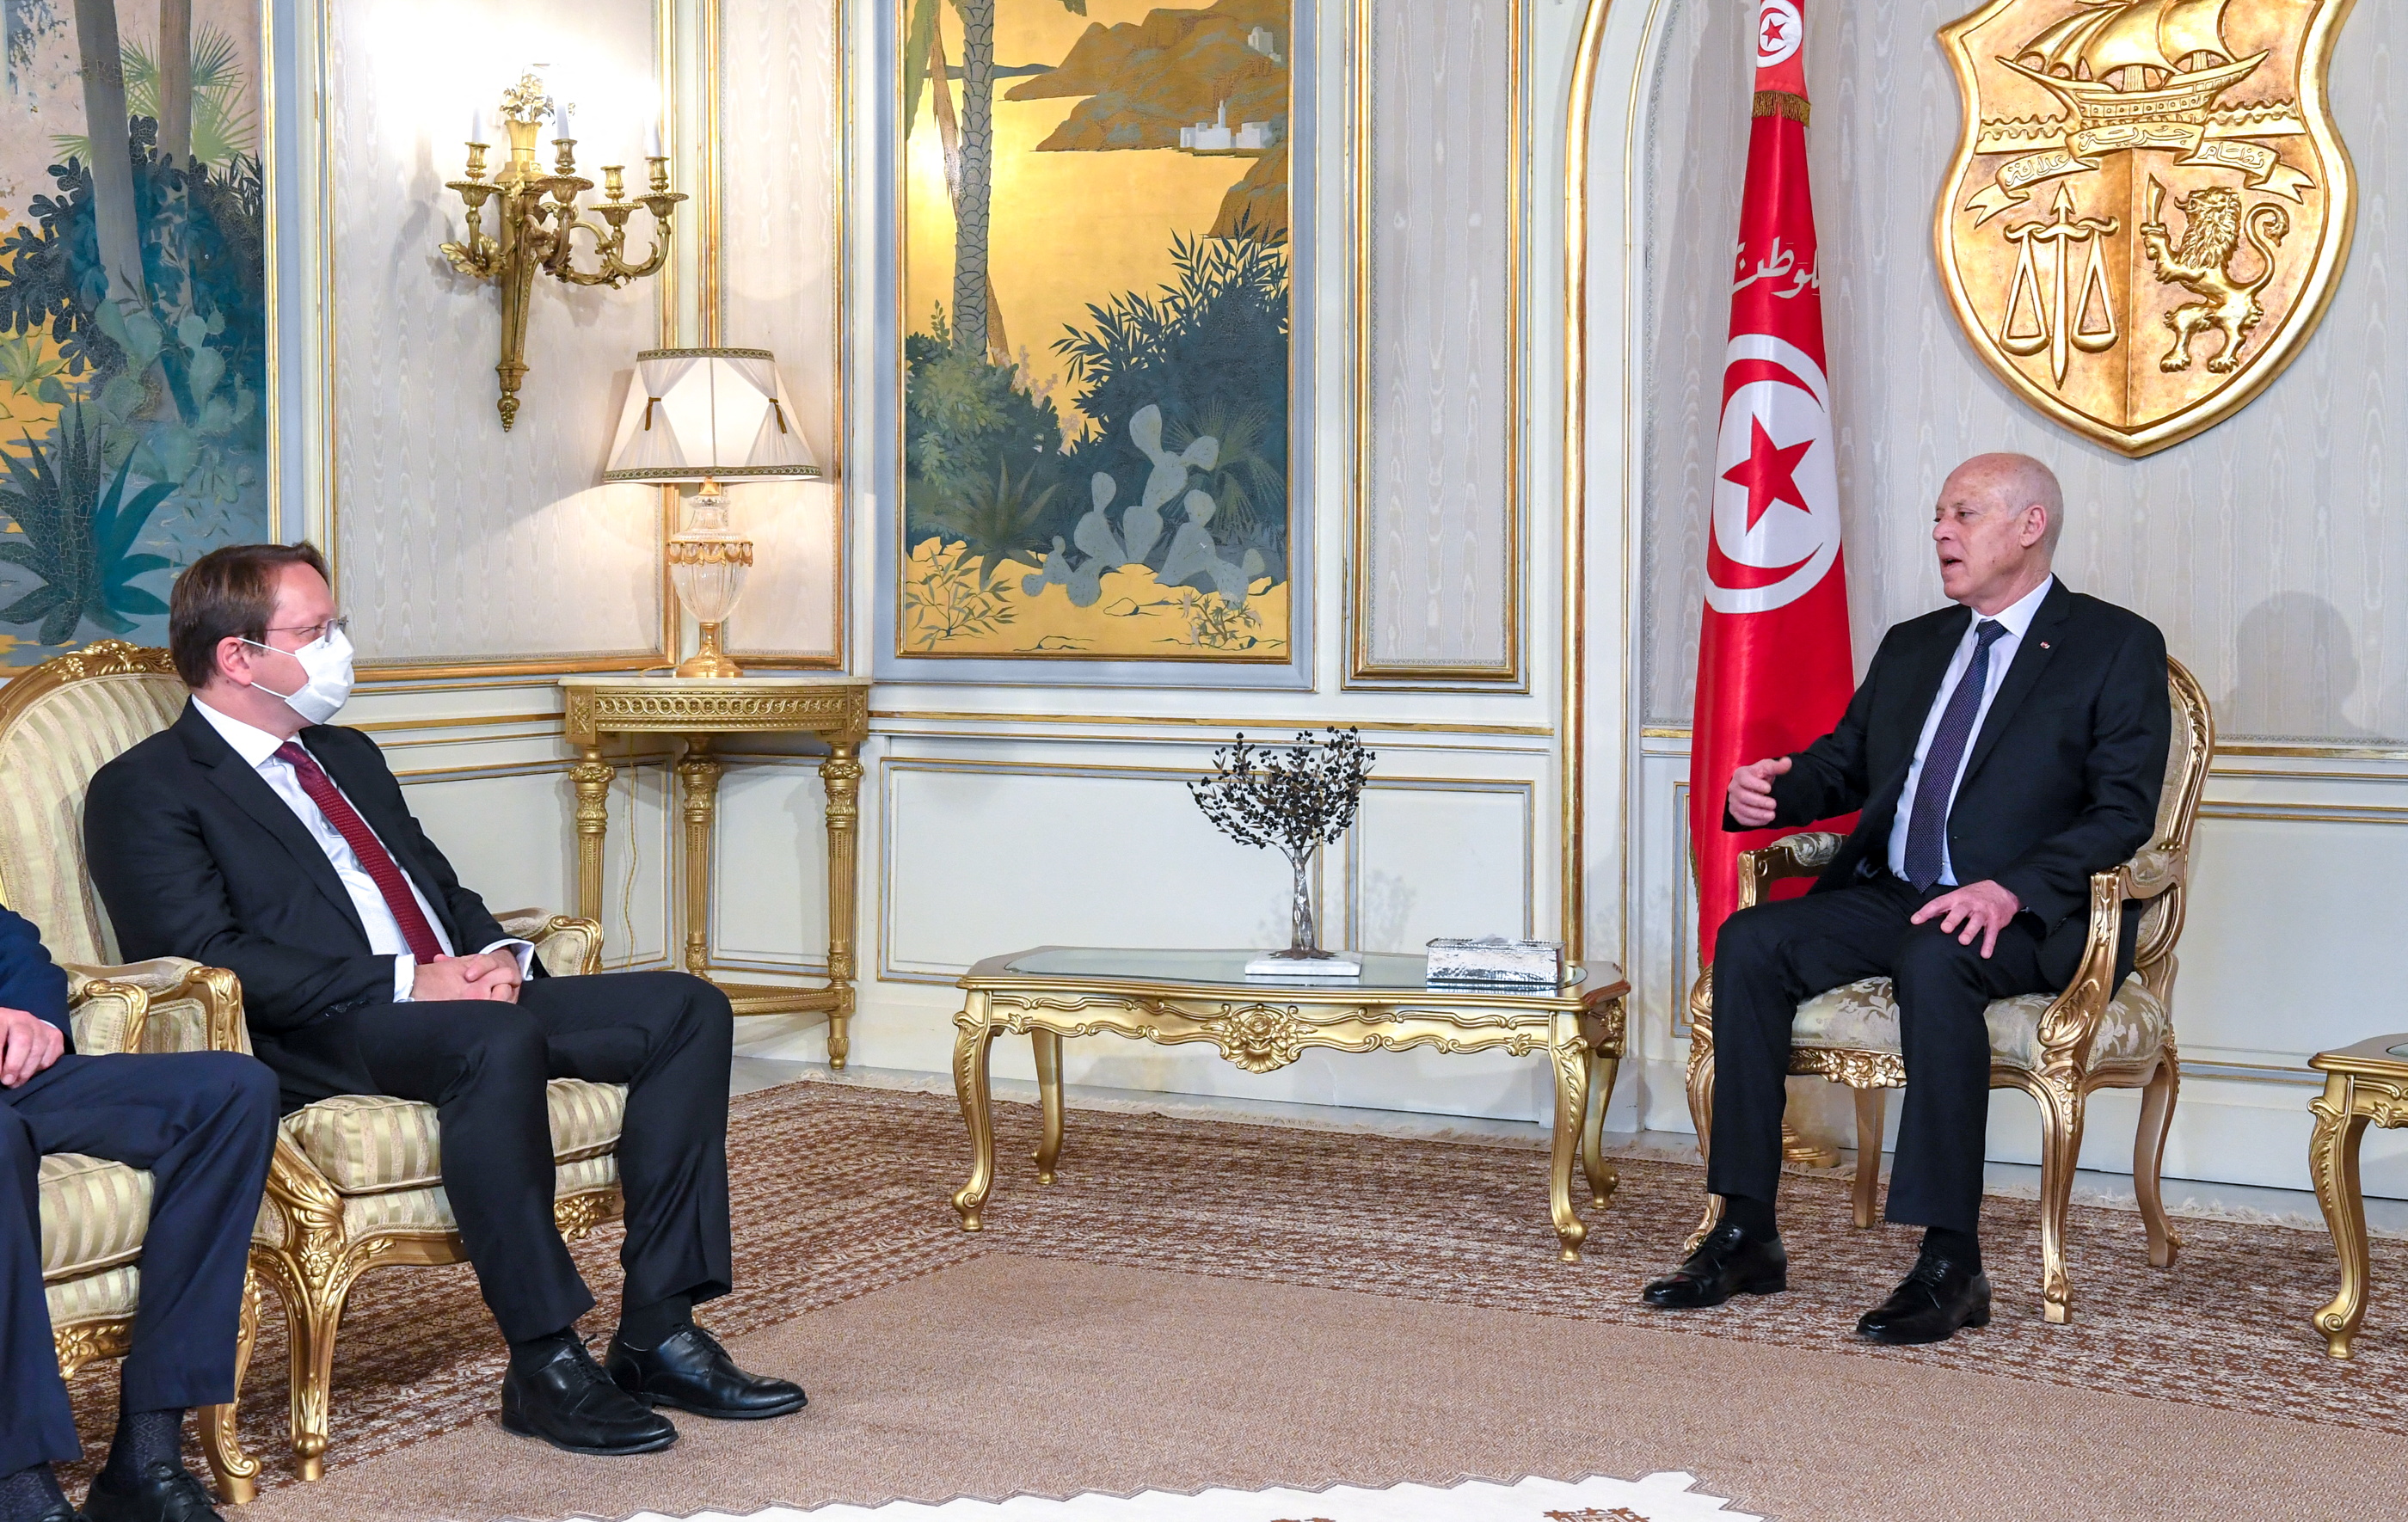 Tunisia's President Kais Saied meets with EU commissioner for enlargement, Oliver Varhelyi, in Tunis